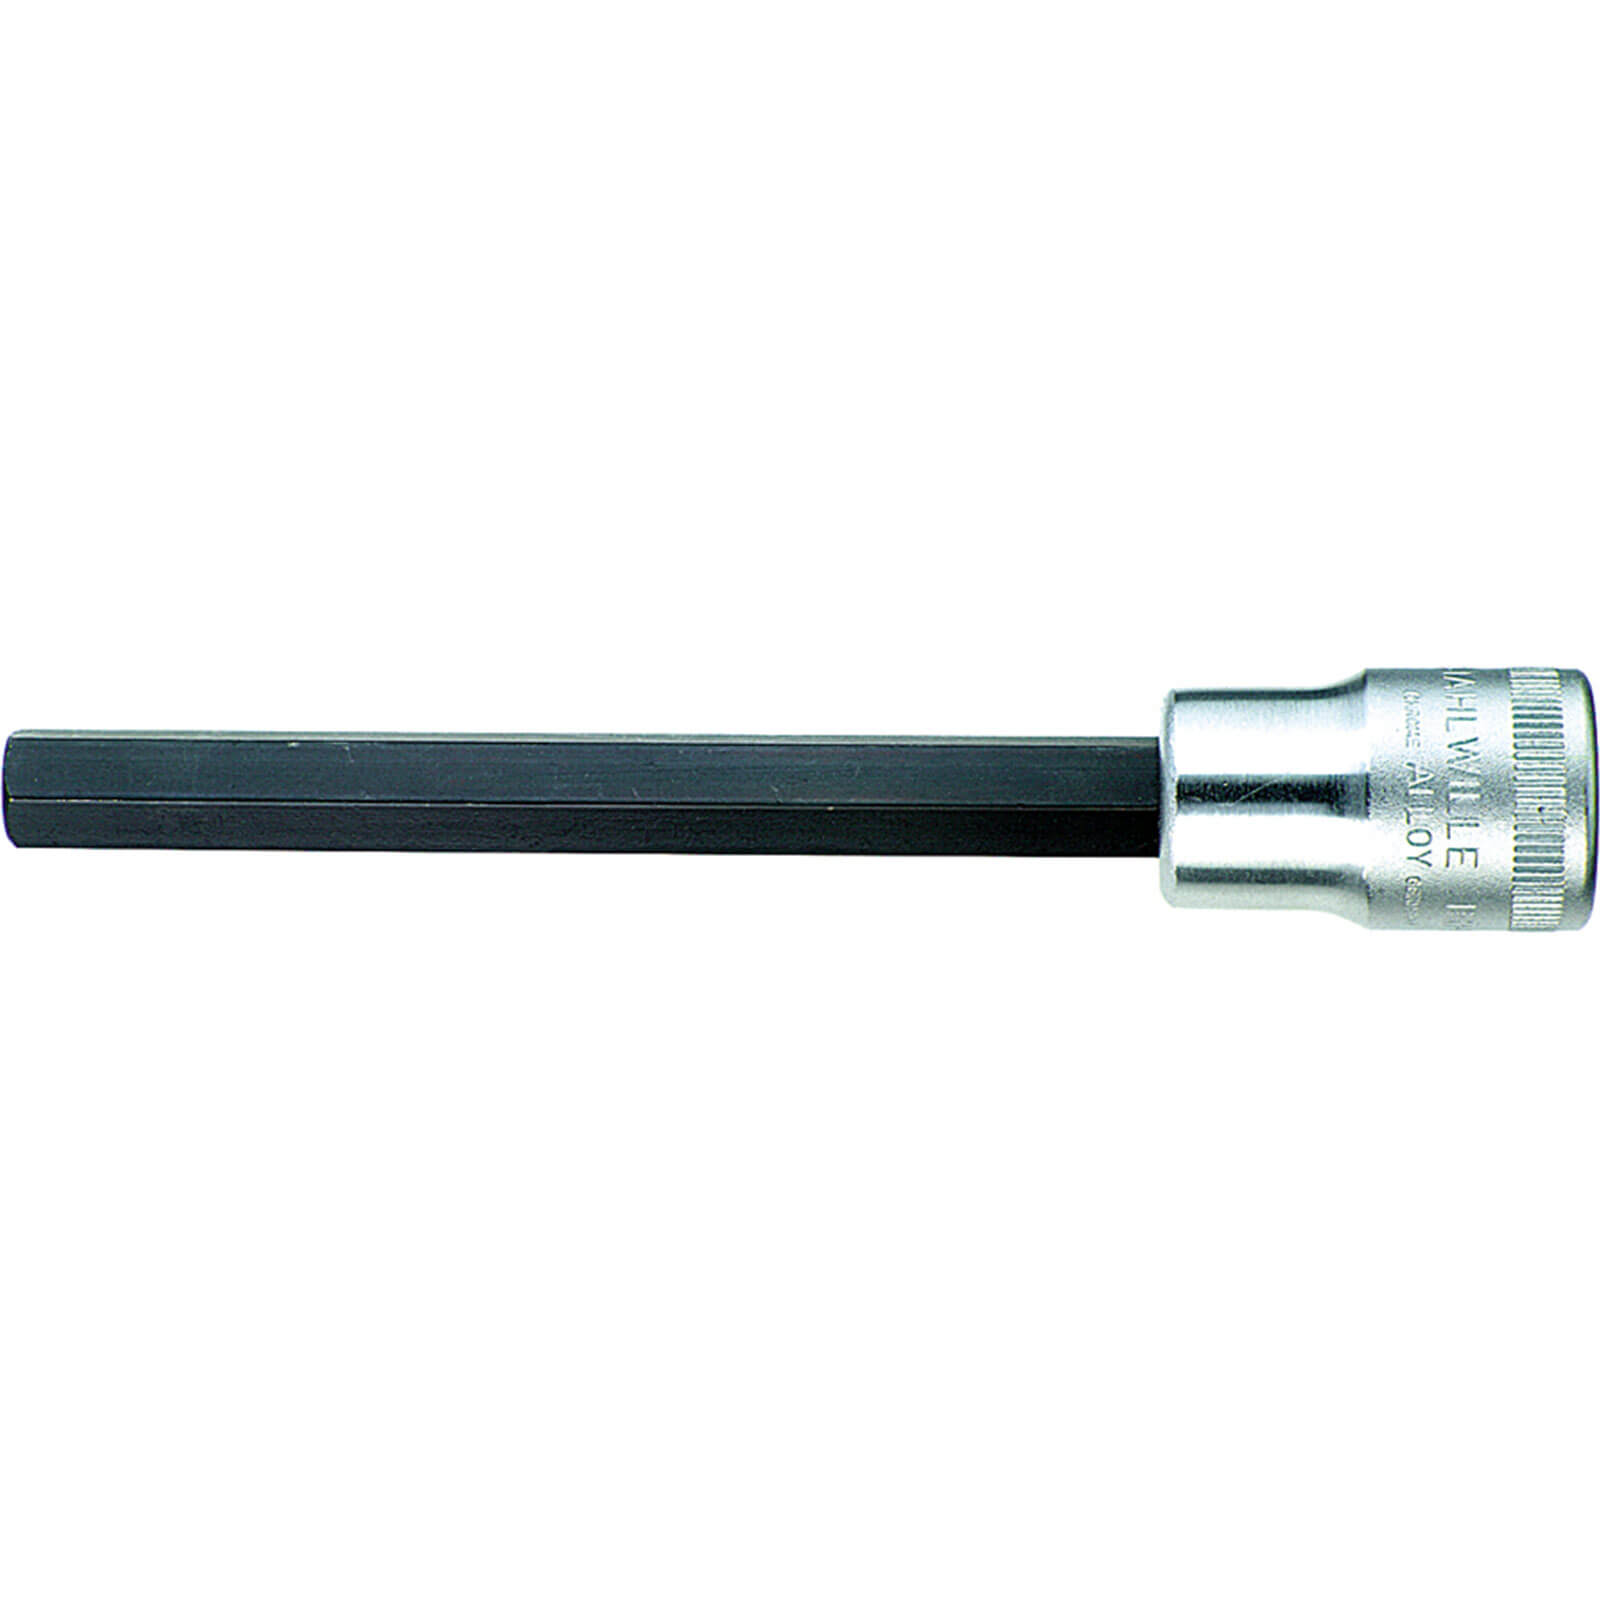 Image of Stahlwille 1/2" Drive Extra Long Hexagon Socket Bit 1/2" 5mm